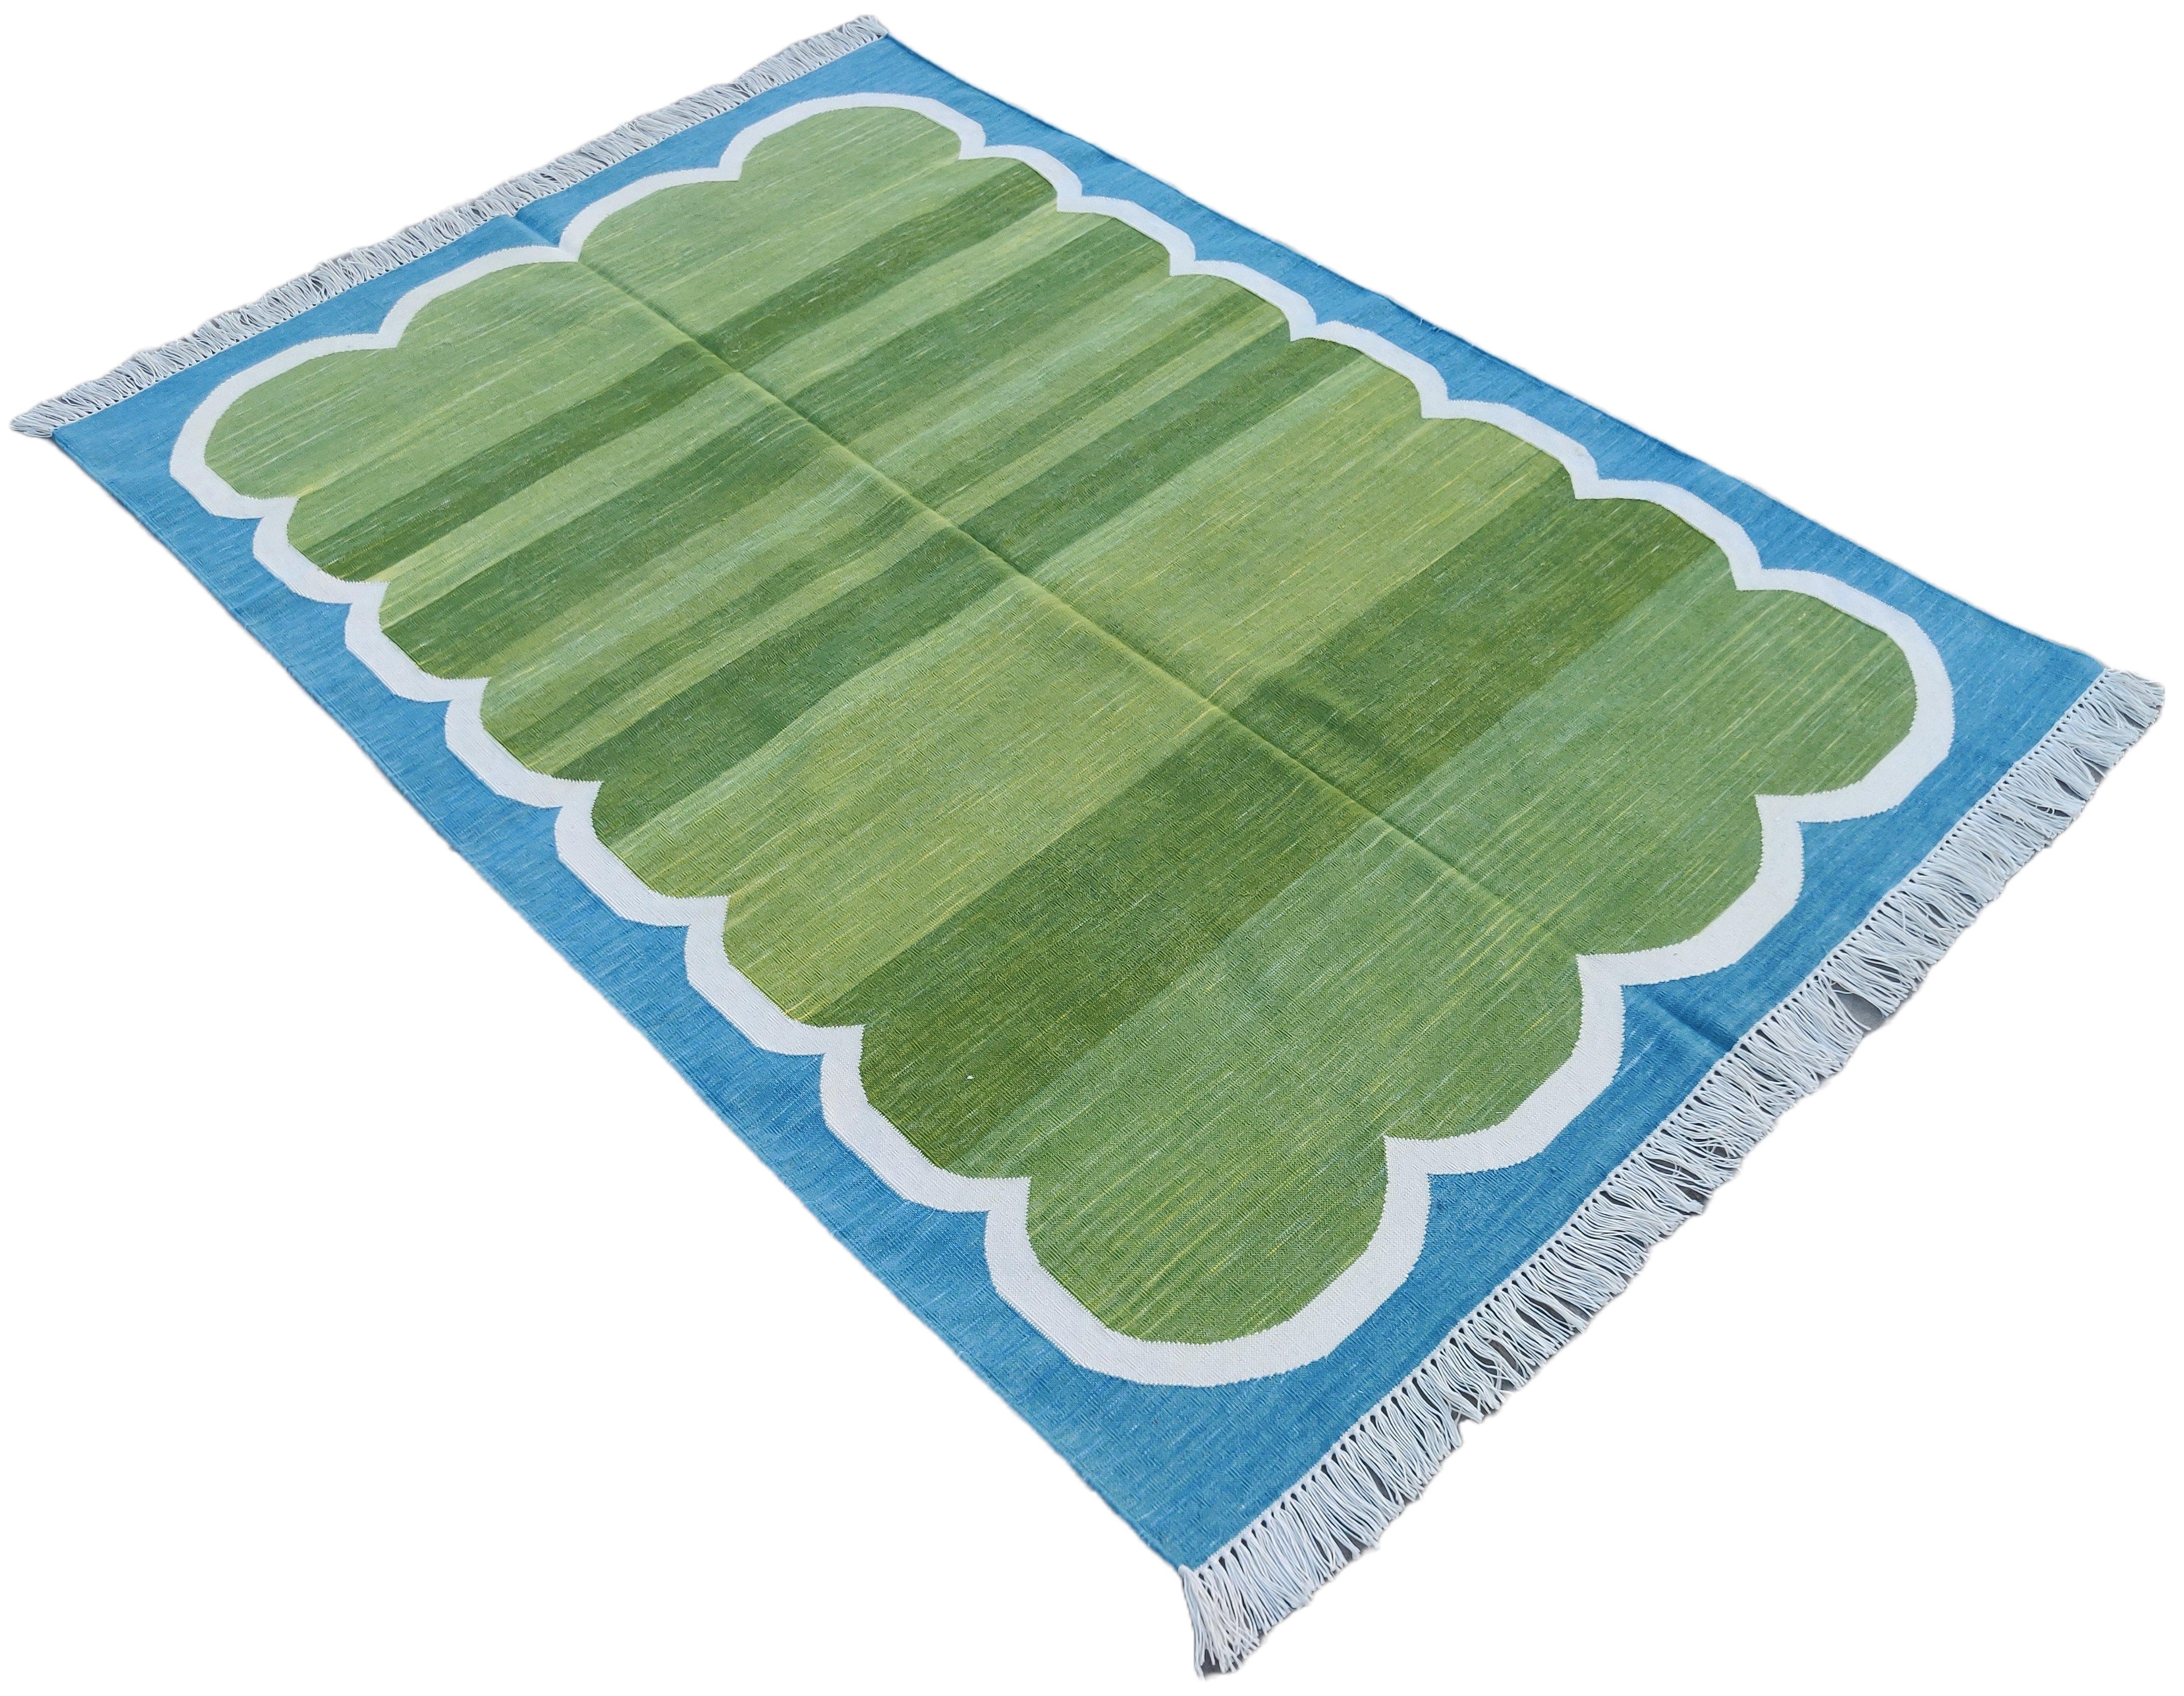 Cotton Vegetable Dyed Green, Cream And Blue Scalloped Striped Indian Dhurrie Rug-4'x6' 
These special flat-weave dhurries are hand-woven with 15 ply 100% cotton yarn. Due to the special manufacturing techniques used to create our rugs, the size and